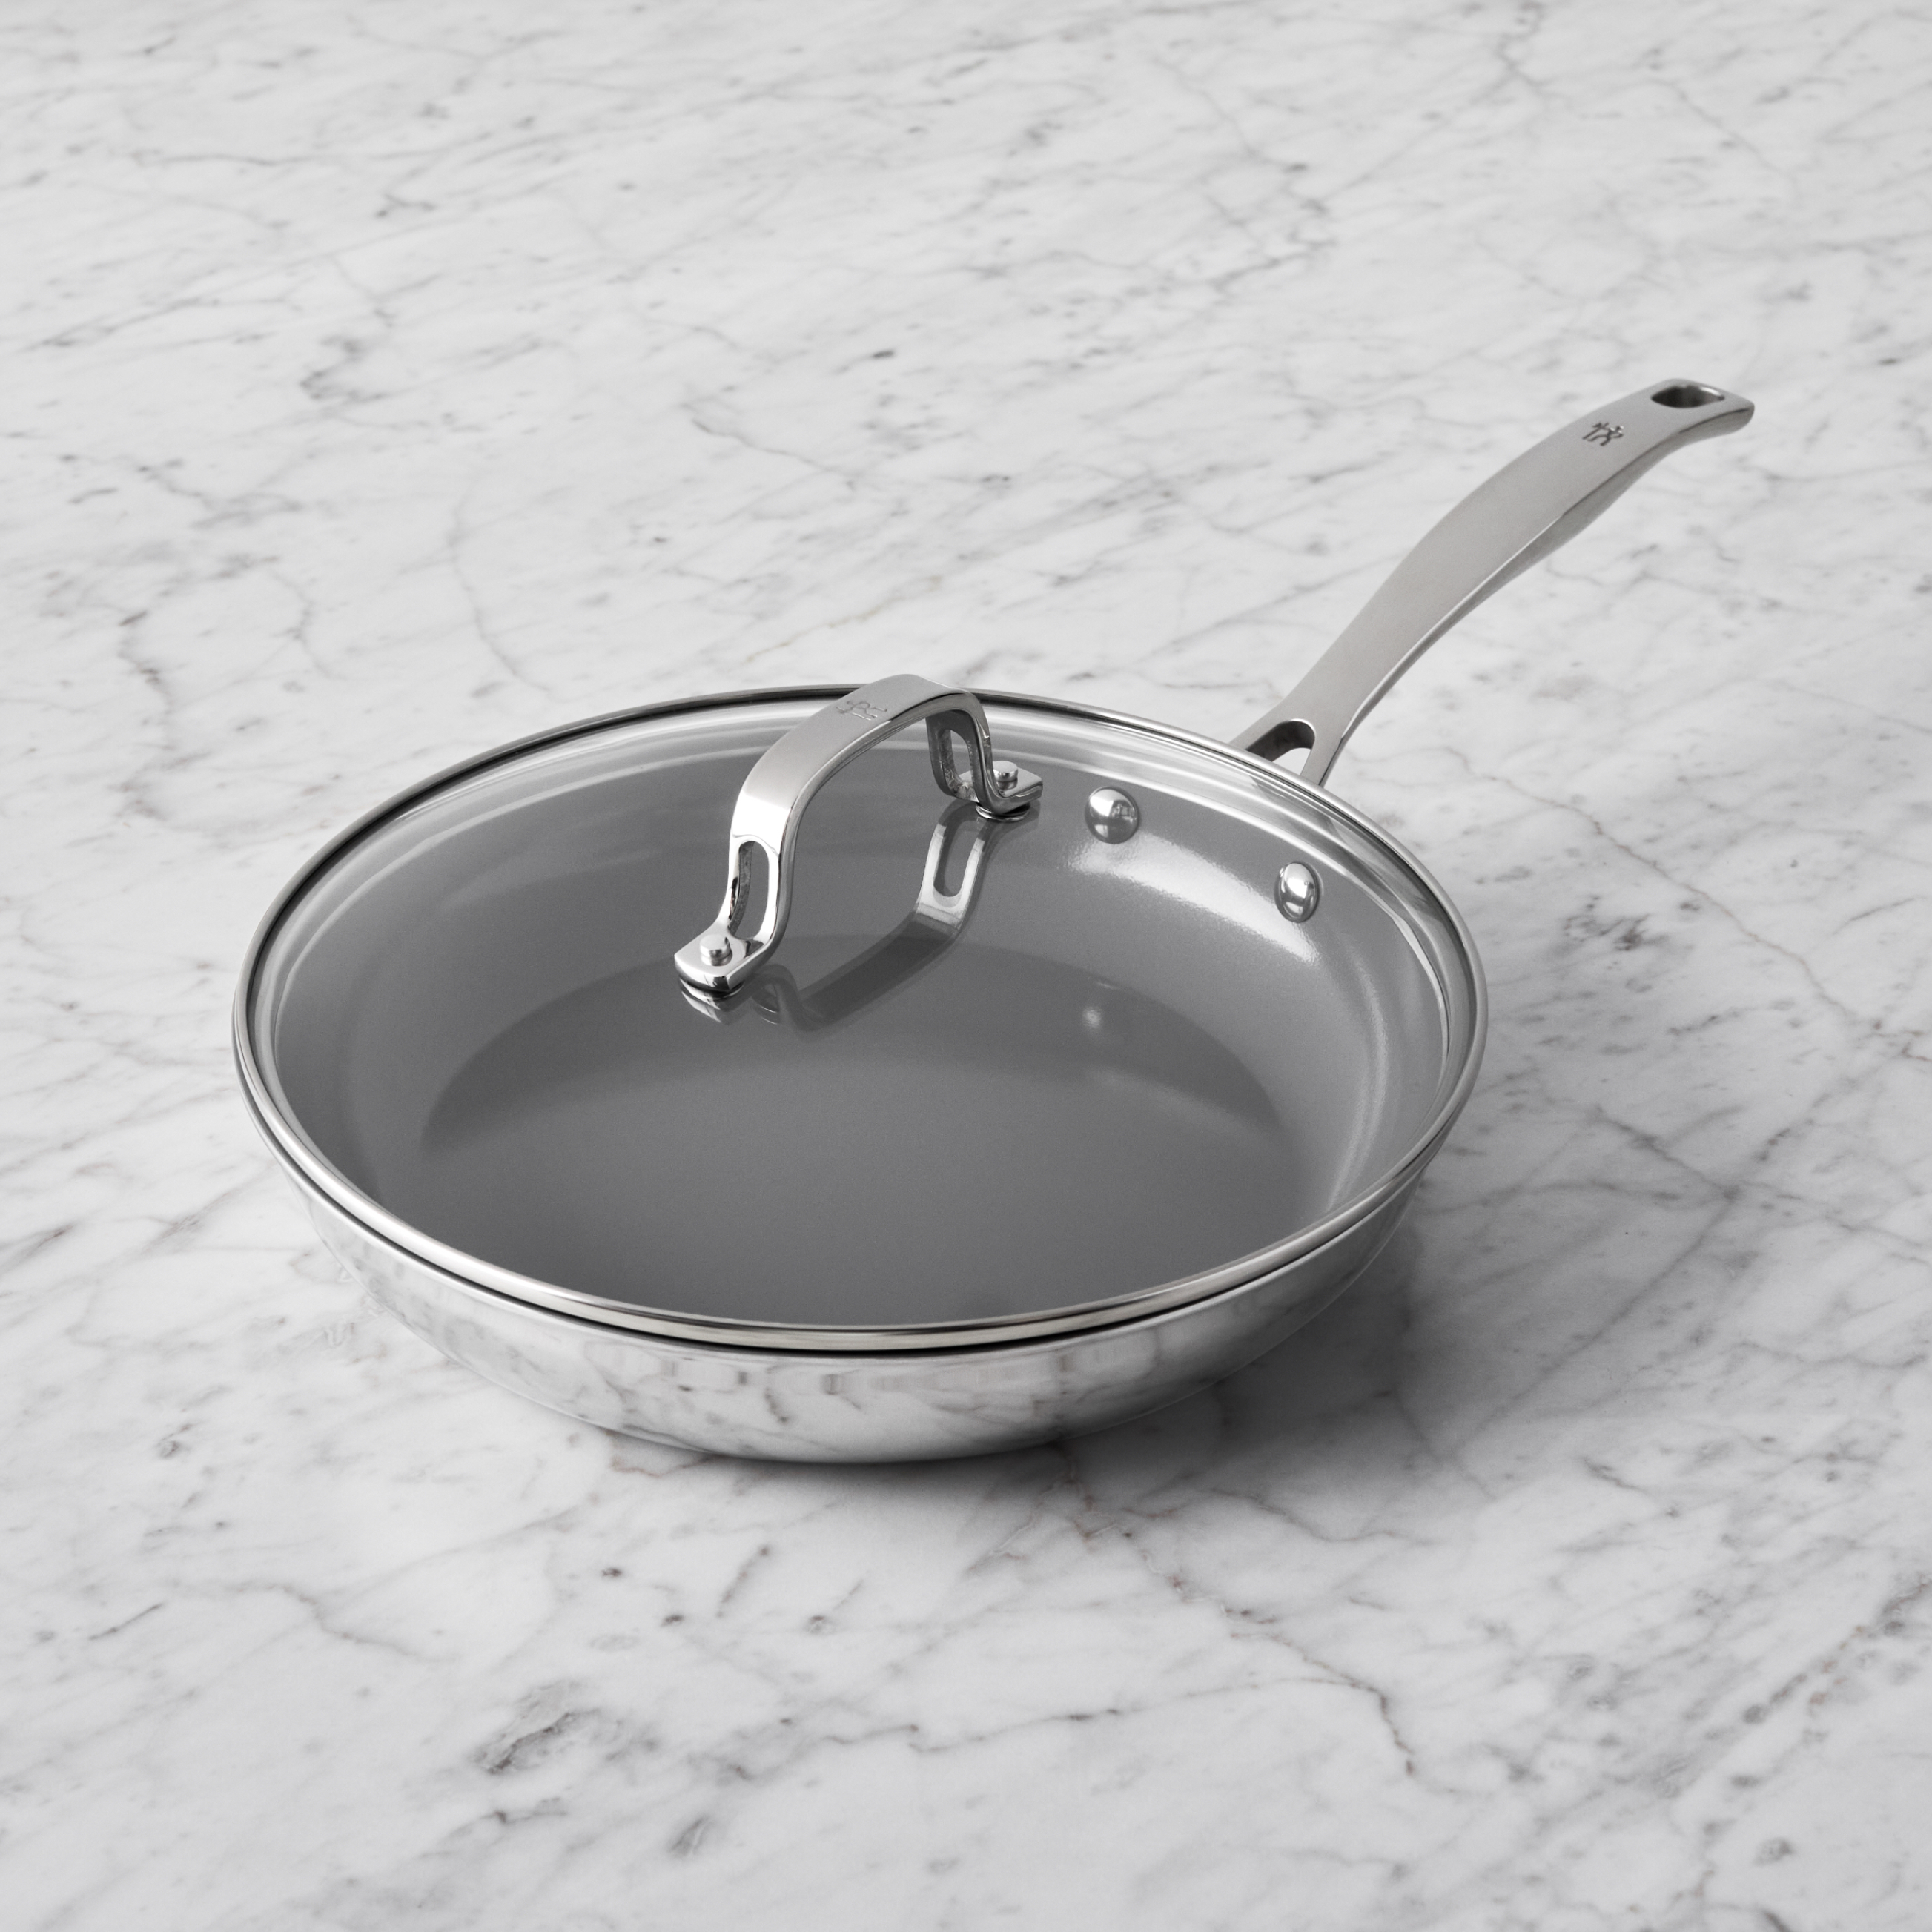 https://www.zwilling.com/on/demandware.static/-/Sites-zwilling-us-Library/default/dw9ce2fb19/images/product-content/masonry-content/henckels/cookware/henckels-h3/H3COATED_05.jpg